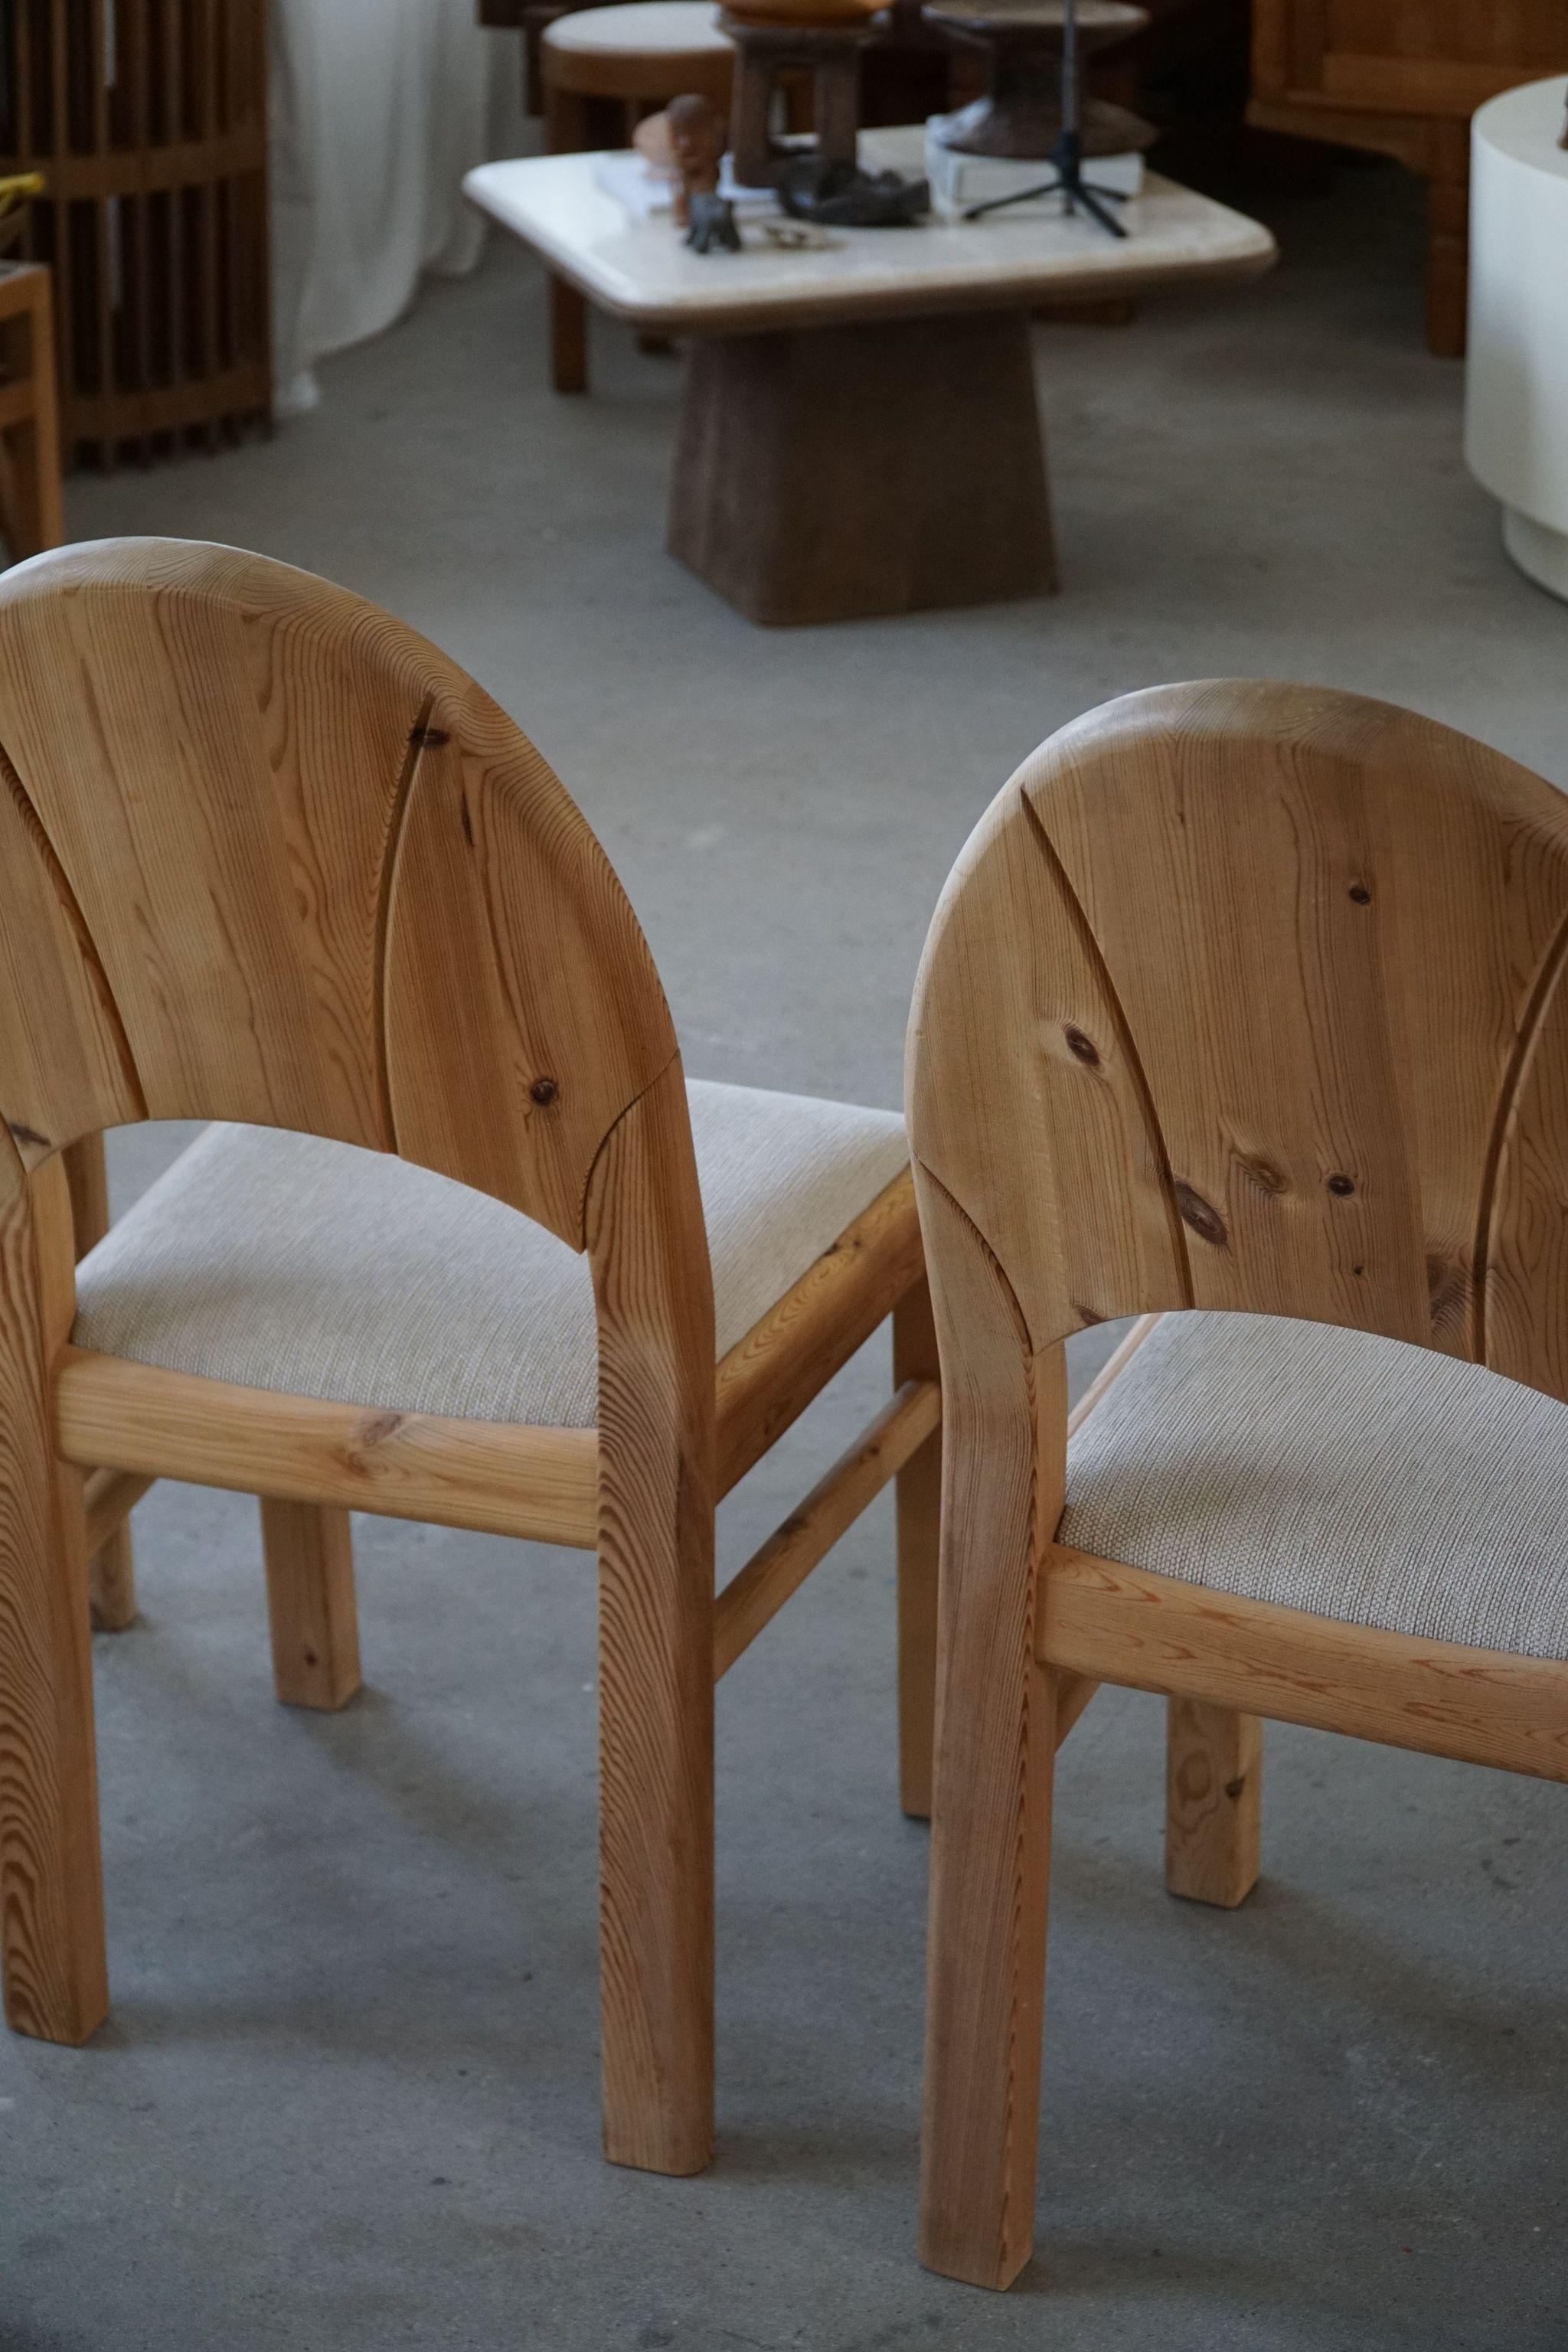 Set of 8 Sculptural Danish Modern Brutalist Chairs in Pine & Wool, 1970s For Sale 7